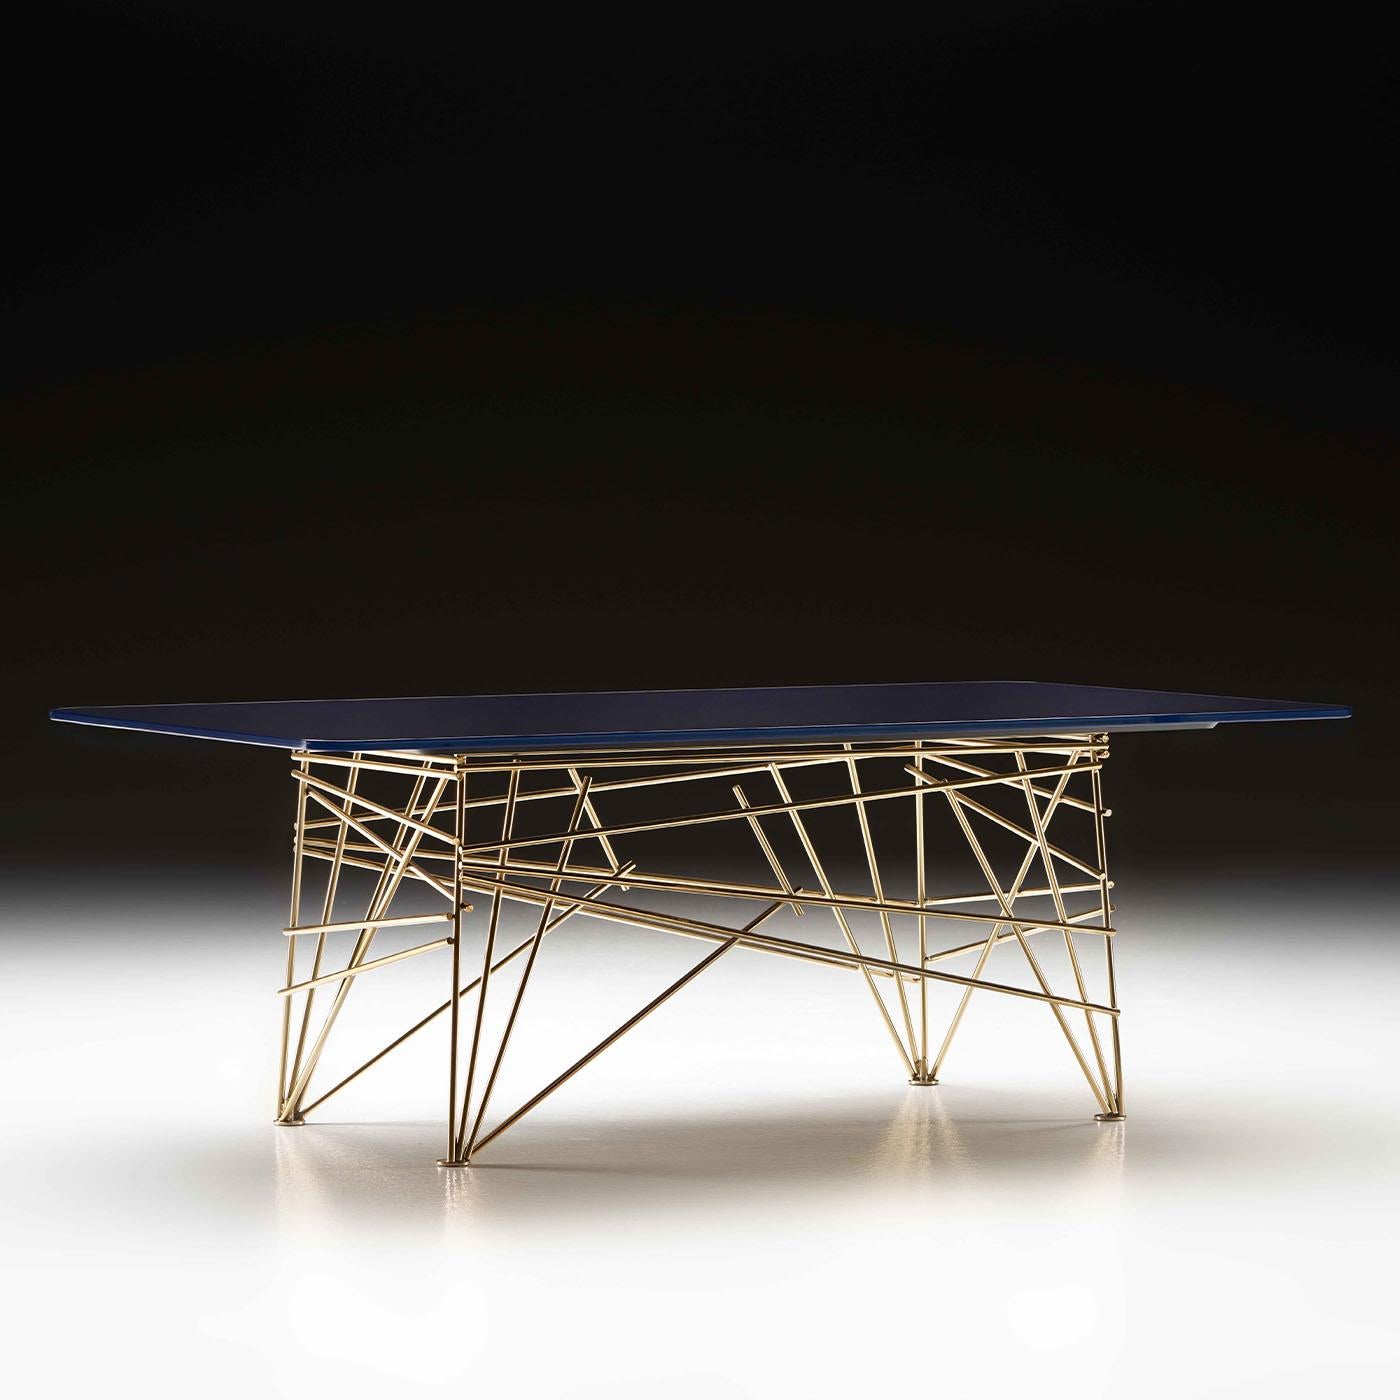 A luminous base where glossy golden stainless steel sticks intricately interact for a stunning dynamic statement that distinguishes this stylish table. The blue shade the glass top is back-painted in suggests a chromatic combination of regal